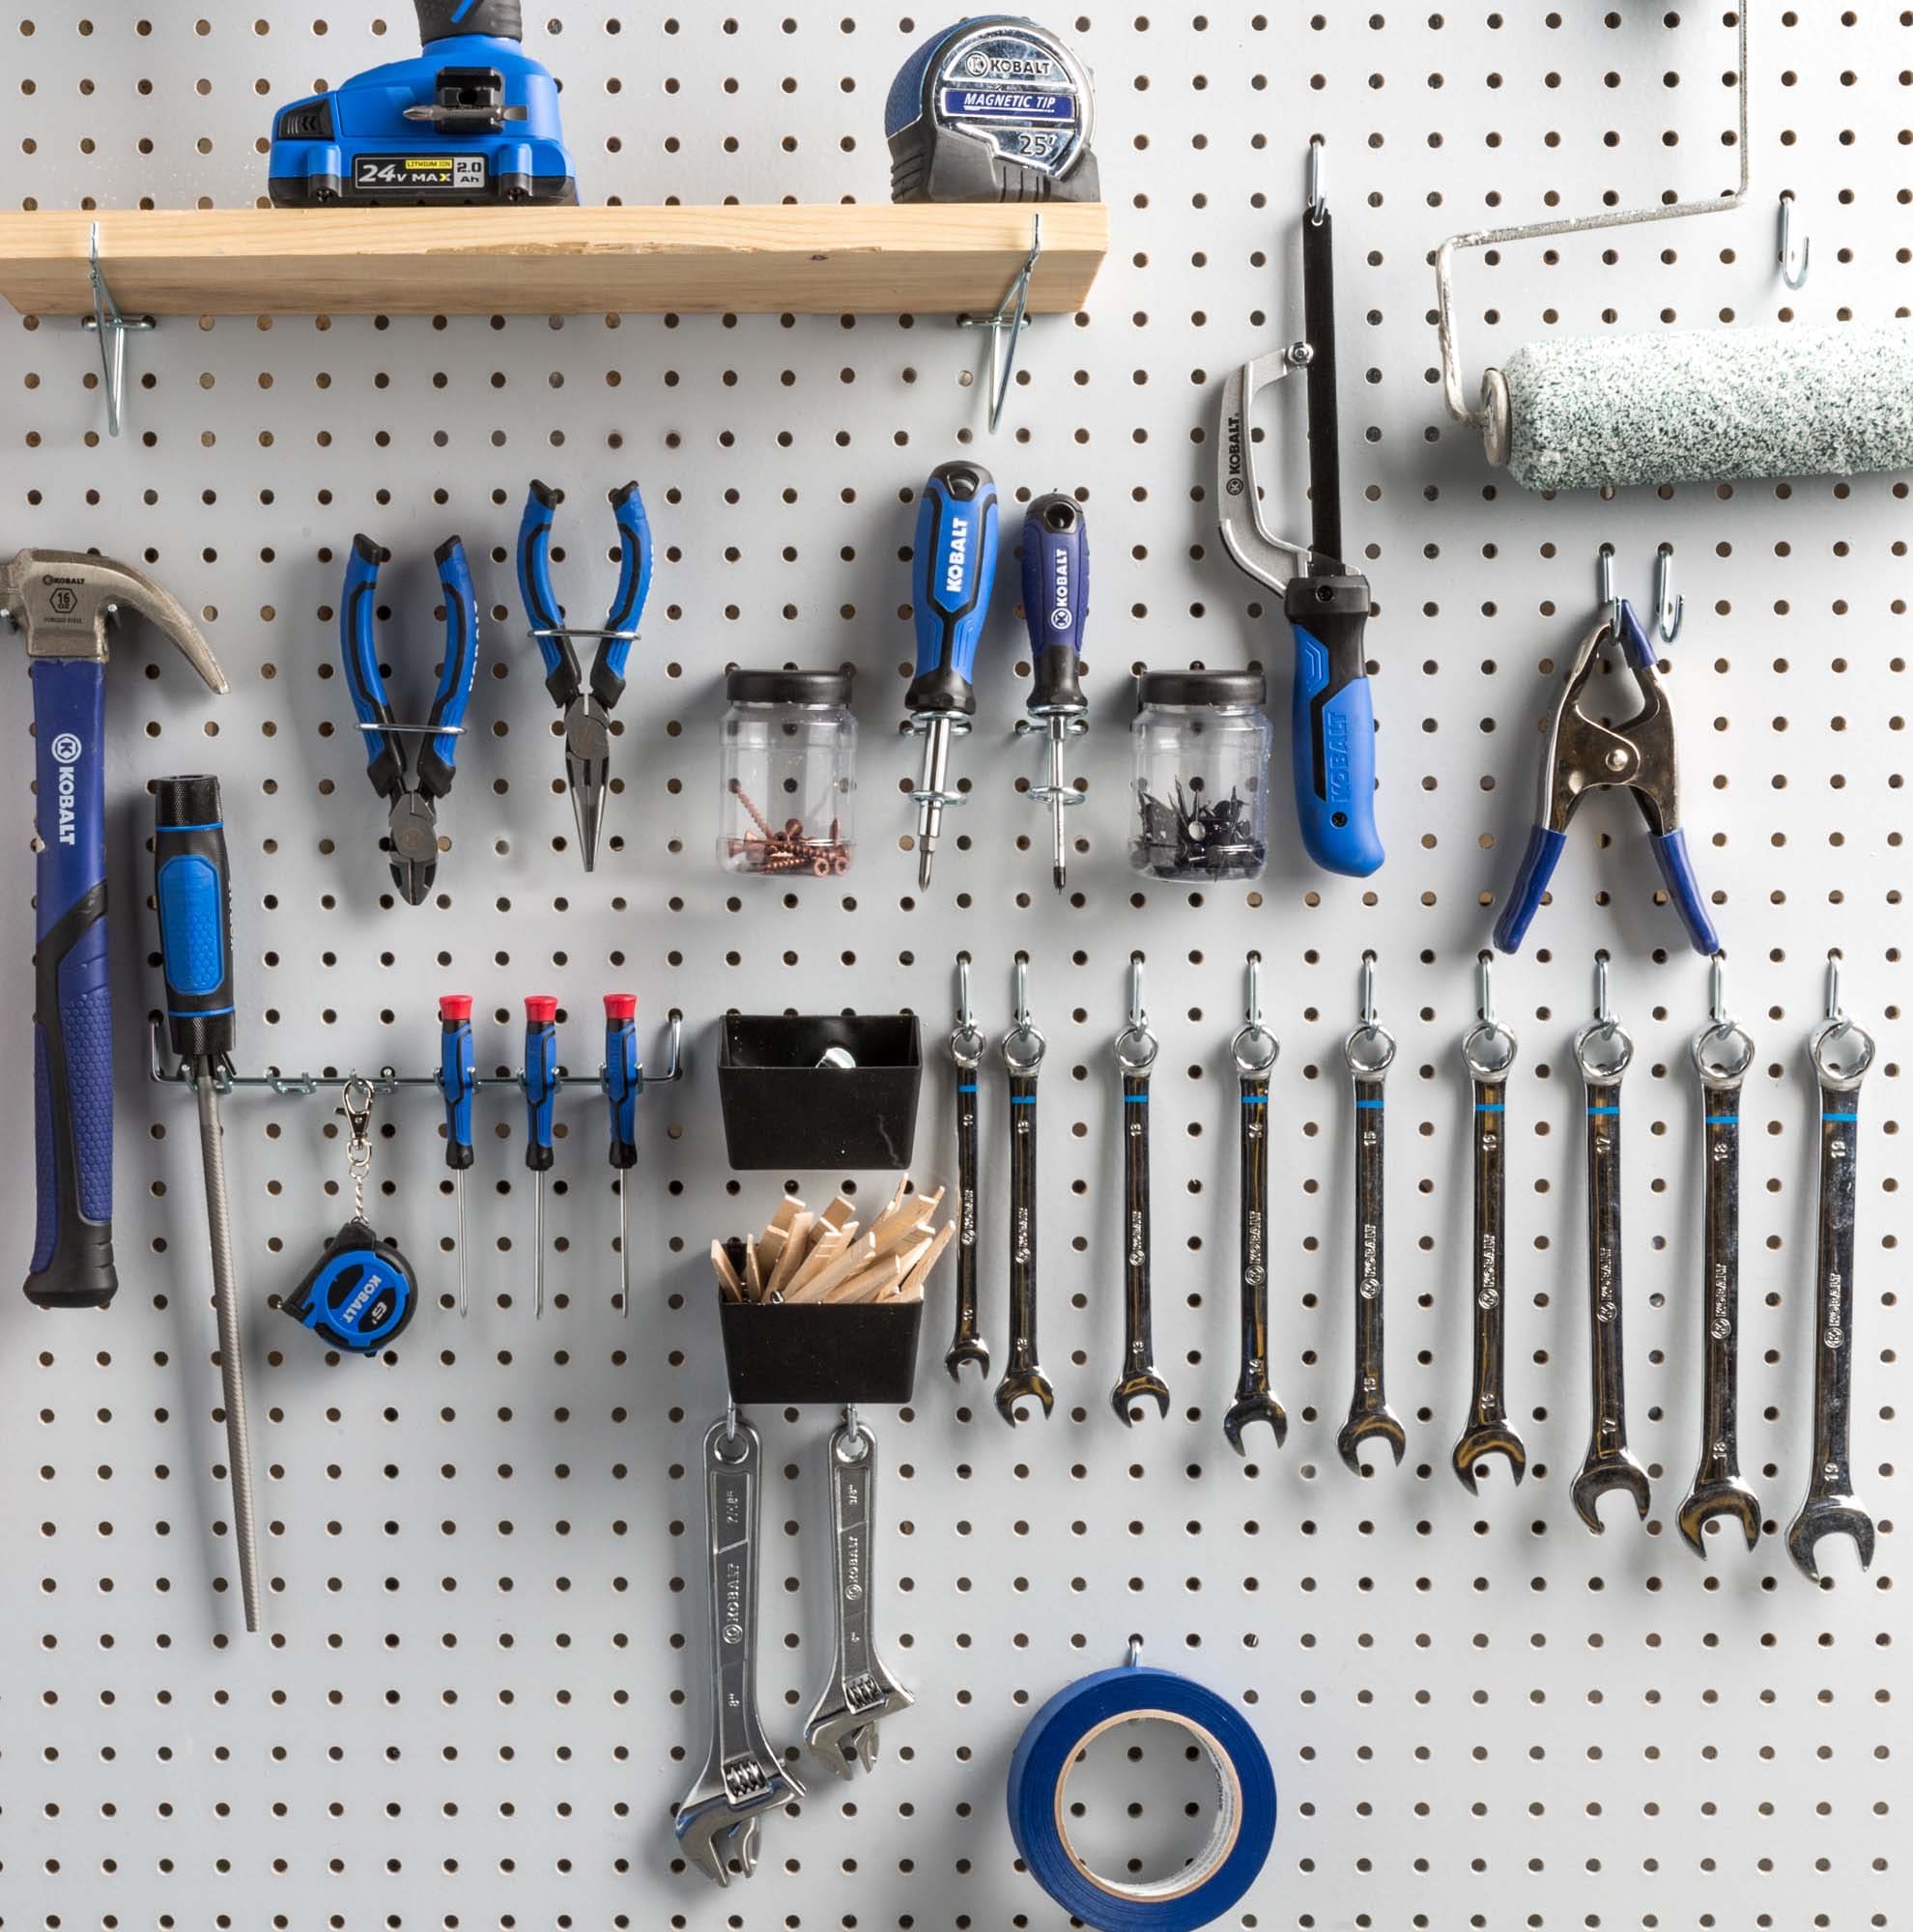 Project Source 43-Piece Steel Pegboard Hook in Silver in the Pegboard &  Accessories department at